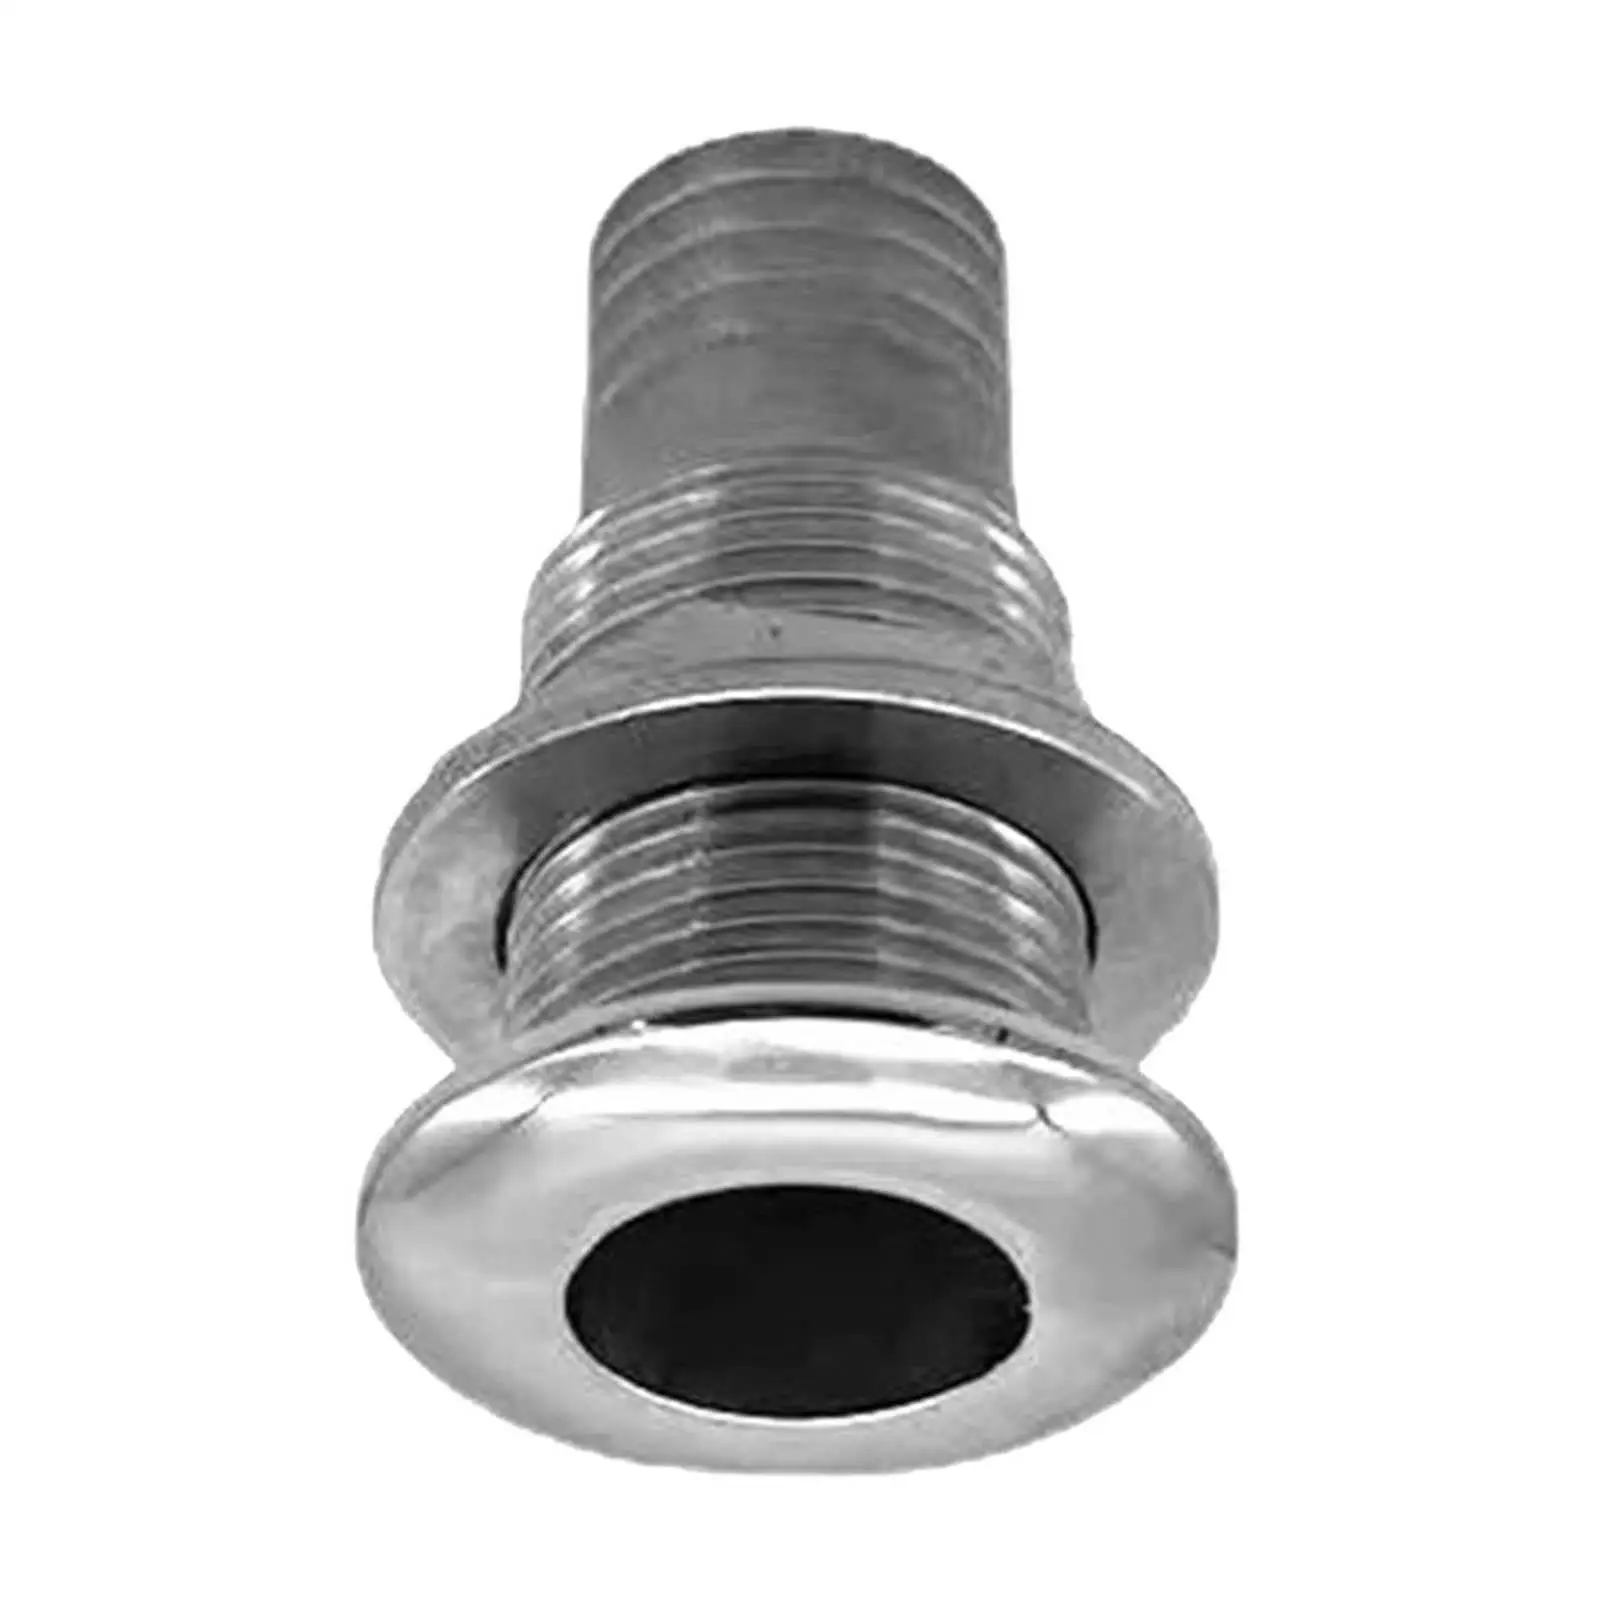 Marine Thru Hull Fitting Stainless Steel Rust Proof Solid Straight Water Outlet Fit for Boats Camper Yachts Caravans Thru Hull